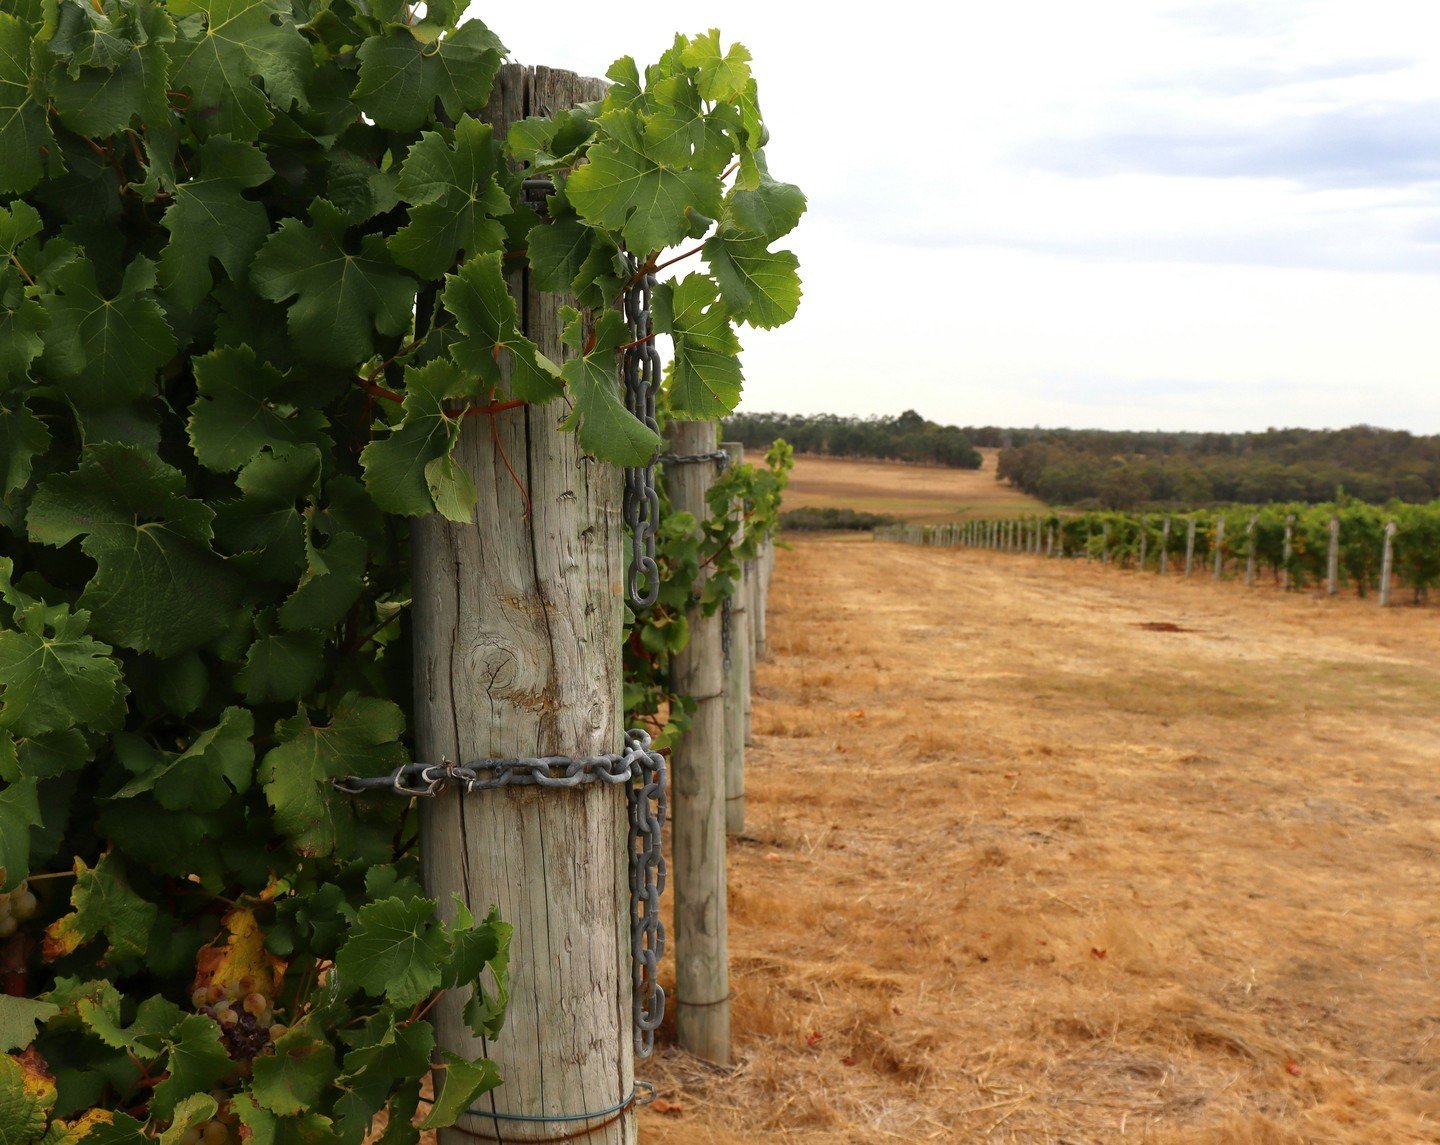 Franklin Tate Estates are committed to producing simple, pure traditional wines.

We are intent on sustaining the integrity and beauty of the Margaret River region.